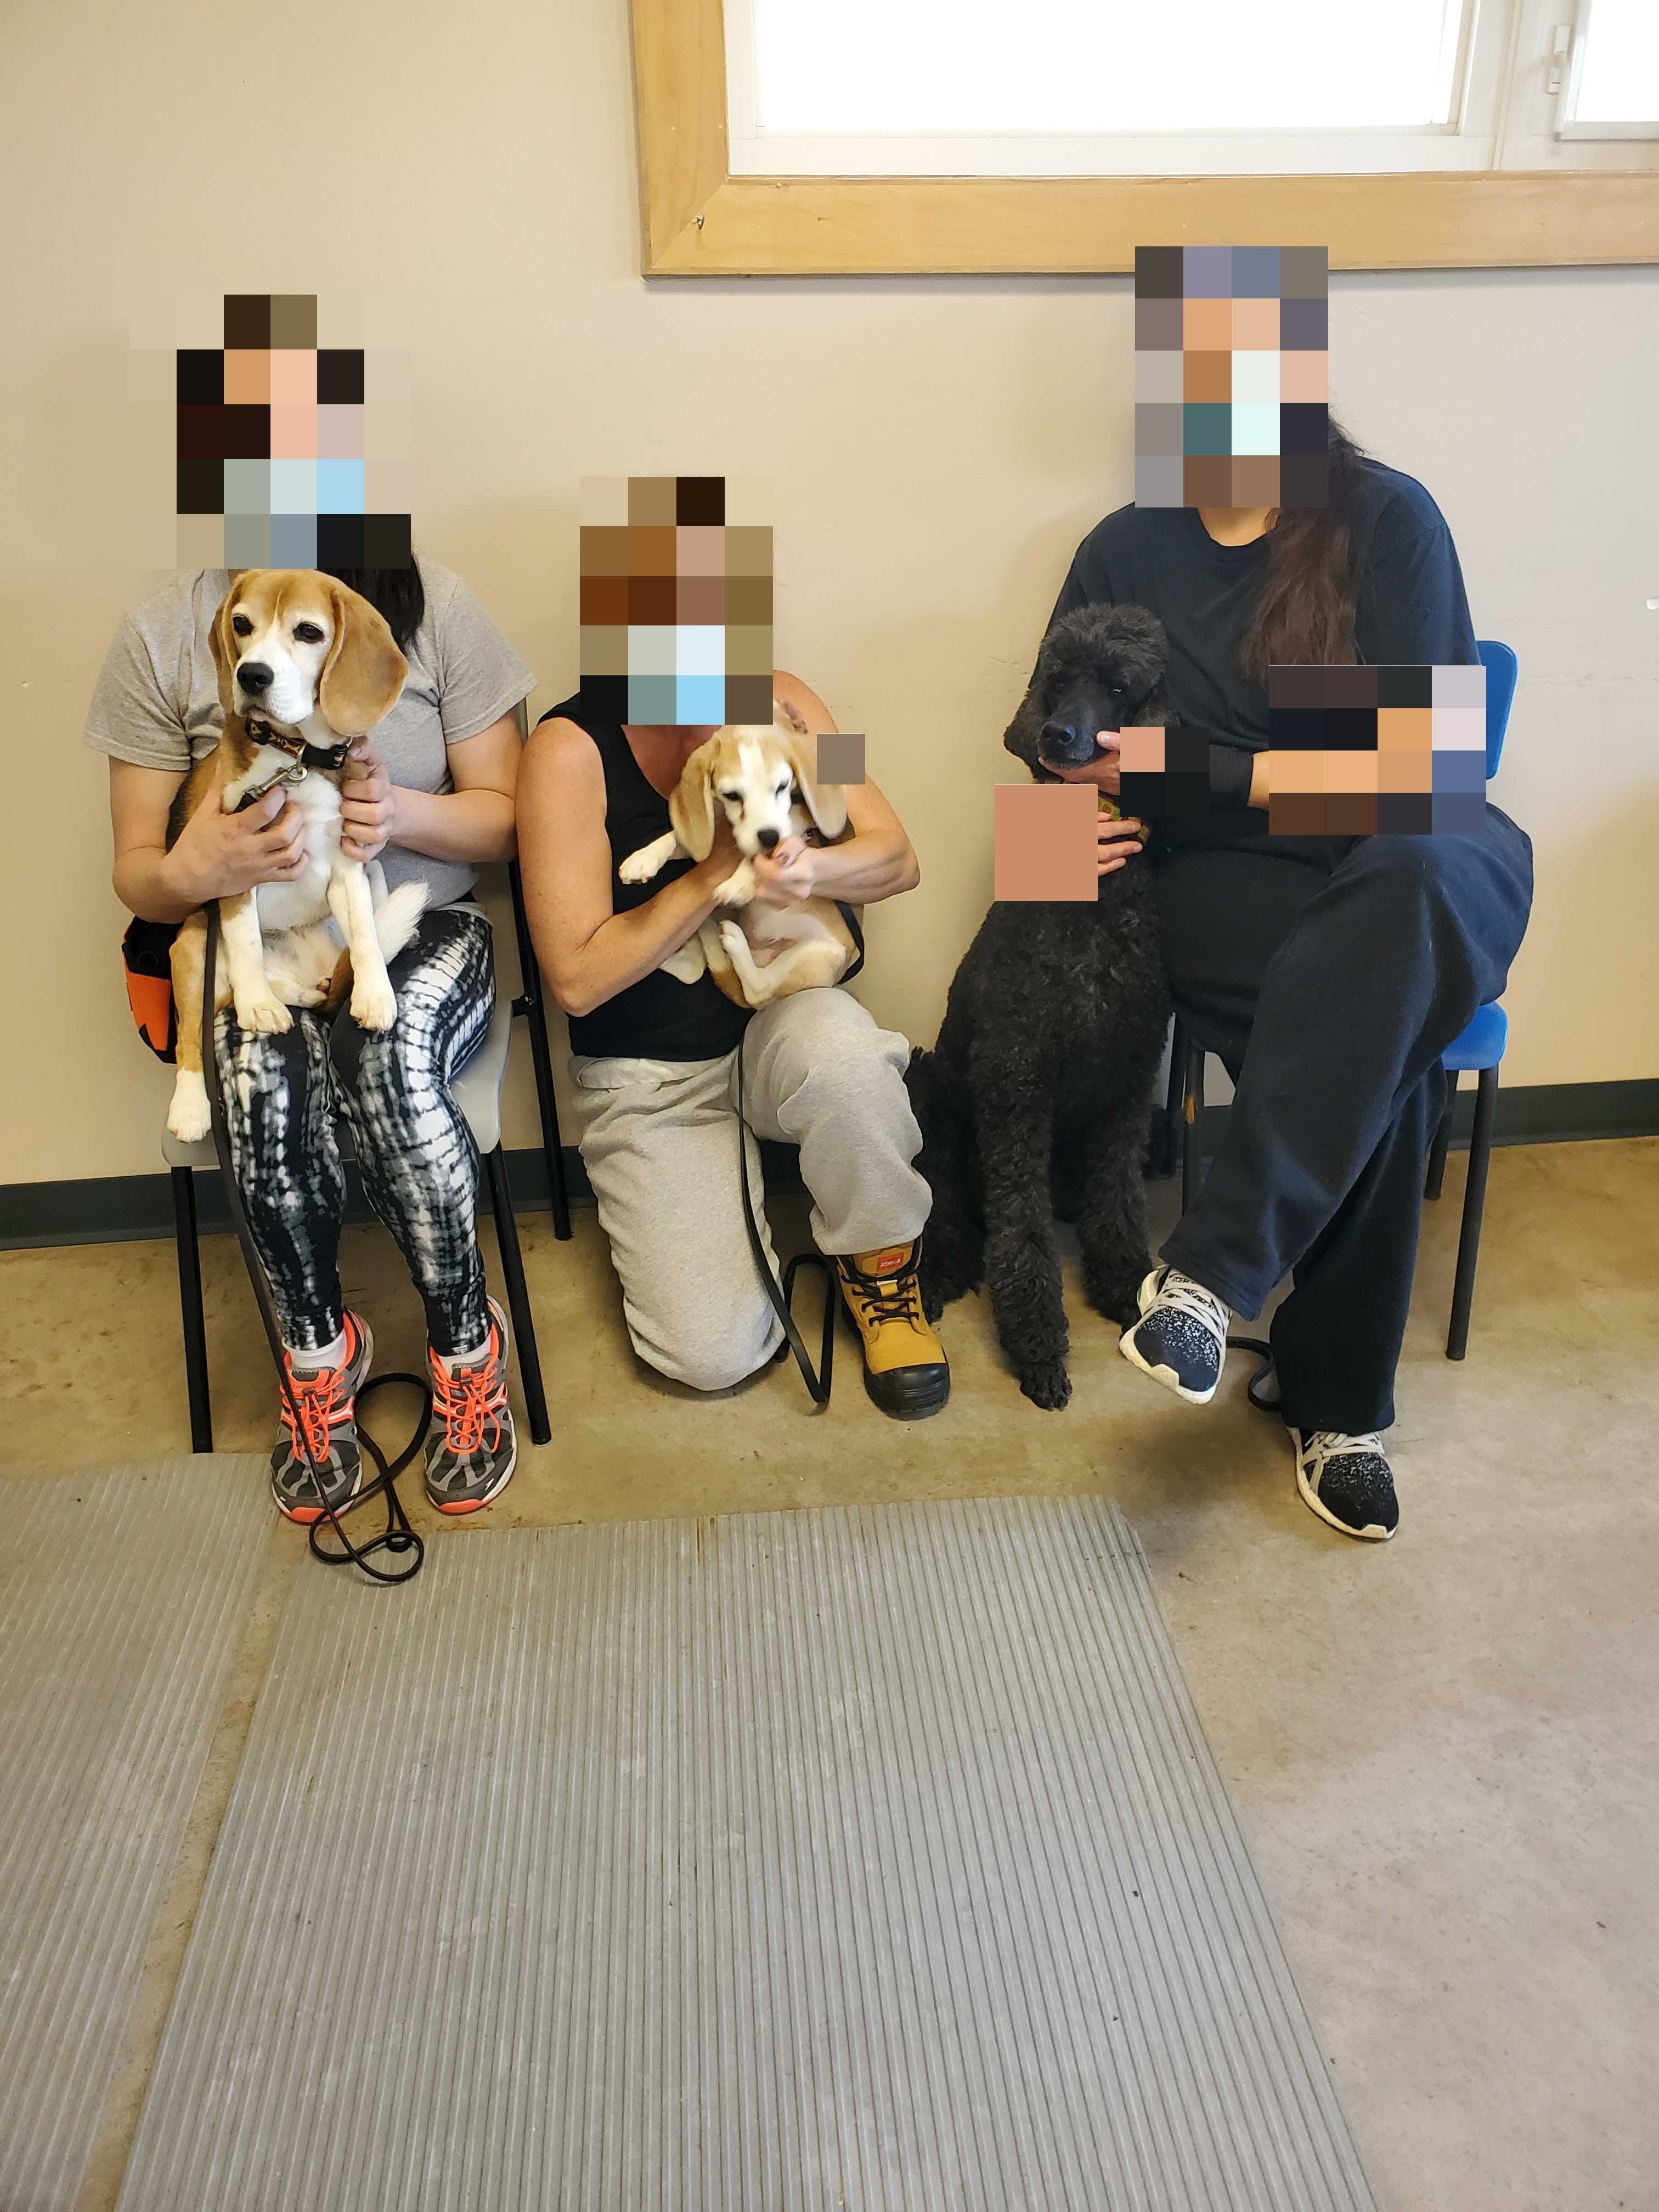 Photo of participants in the dog program at Nova Institution.